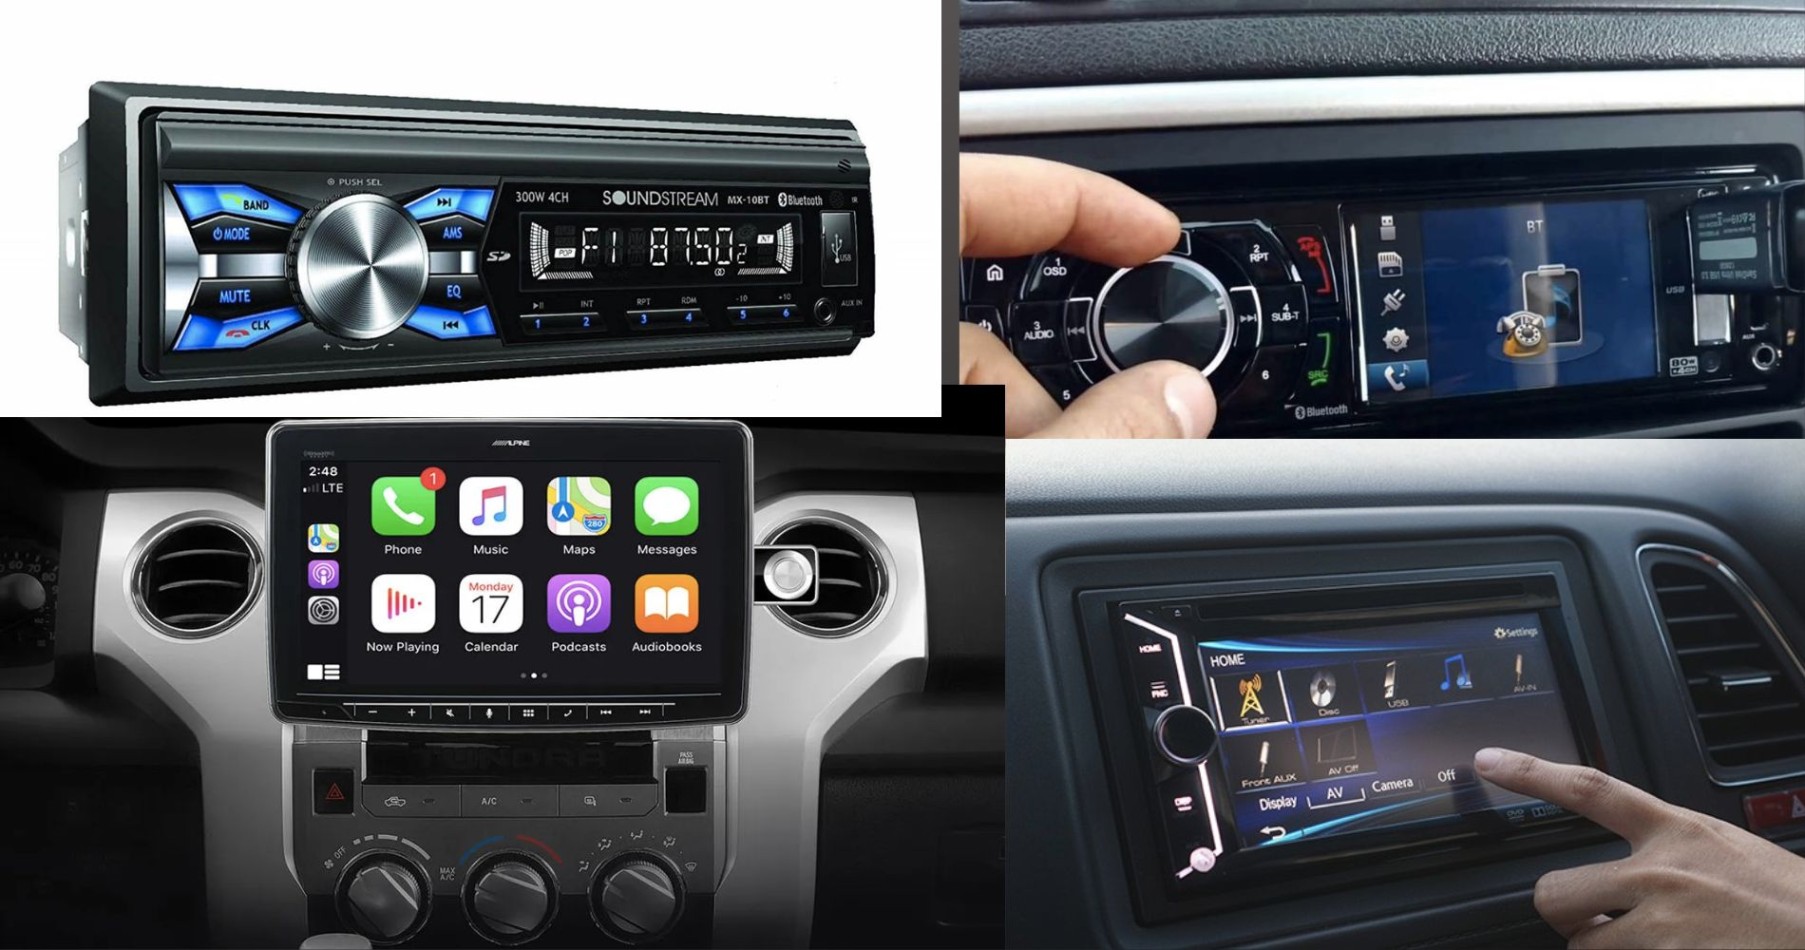 Our Top picks for best Car audio system with Modern Features